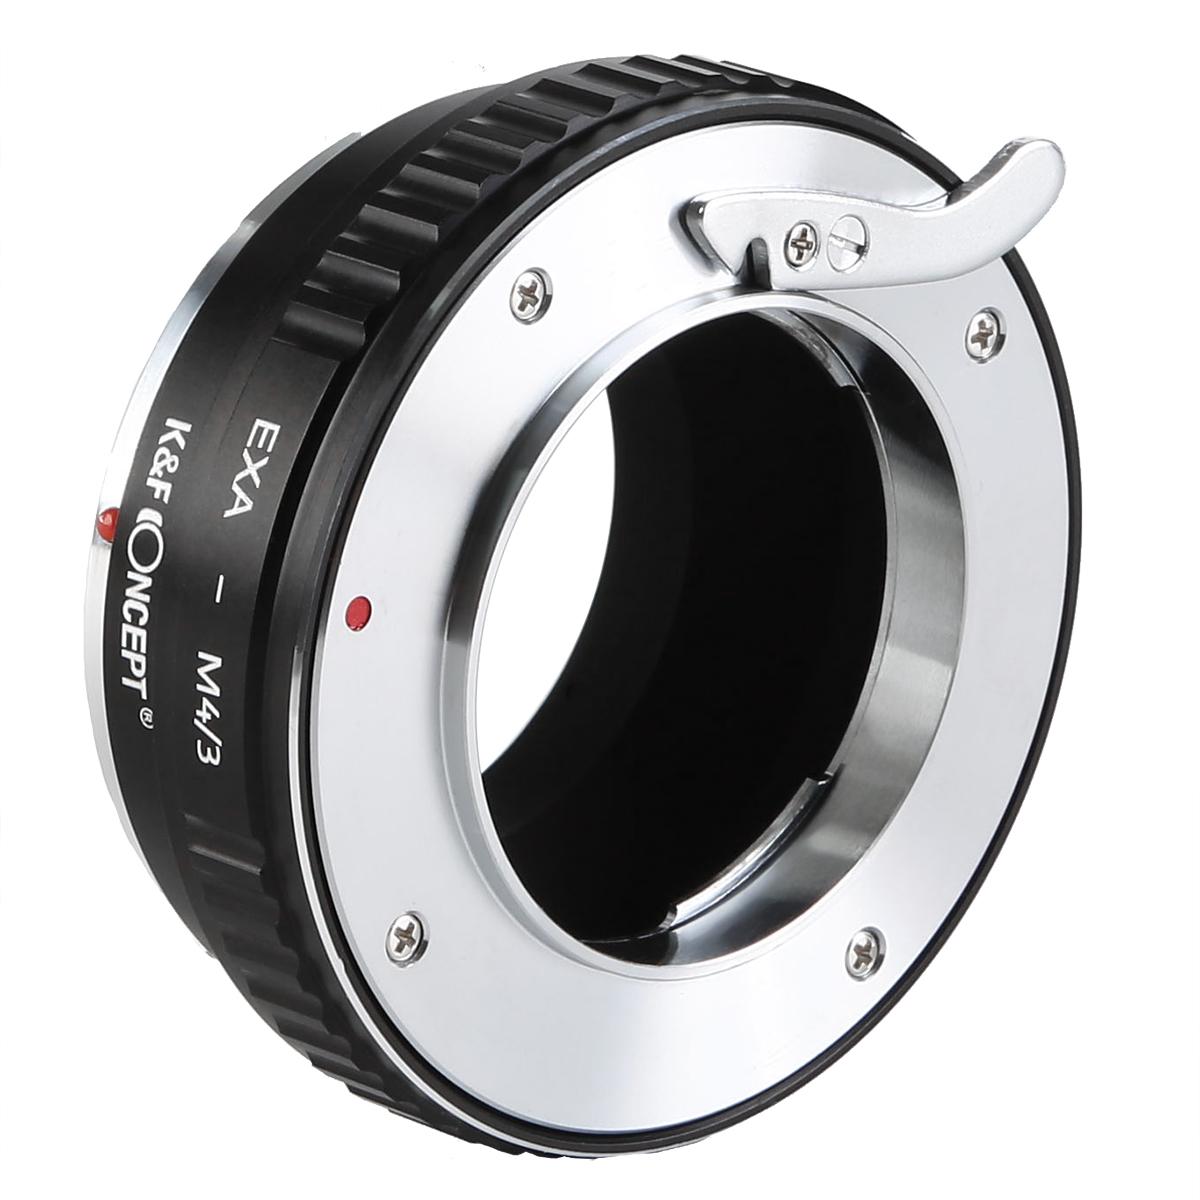 Lens Adapters for M4/3 Cameras